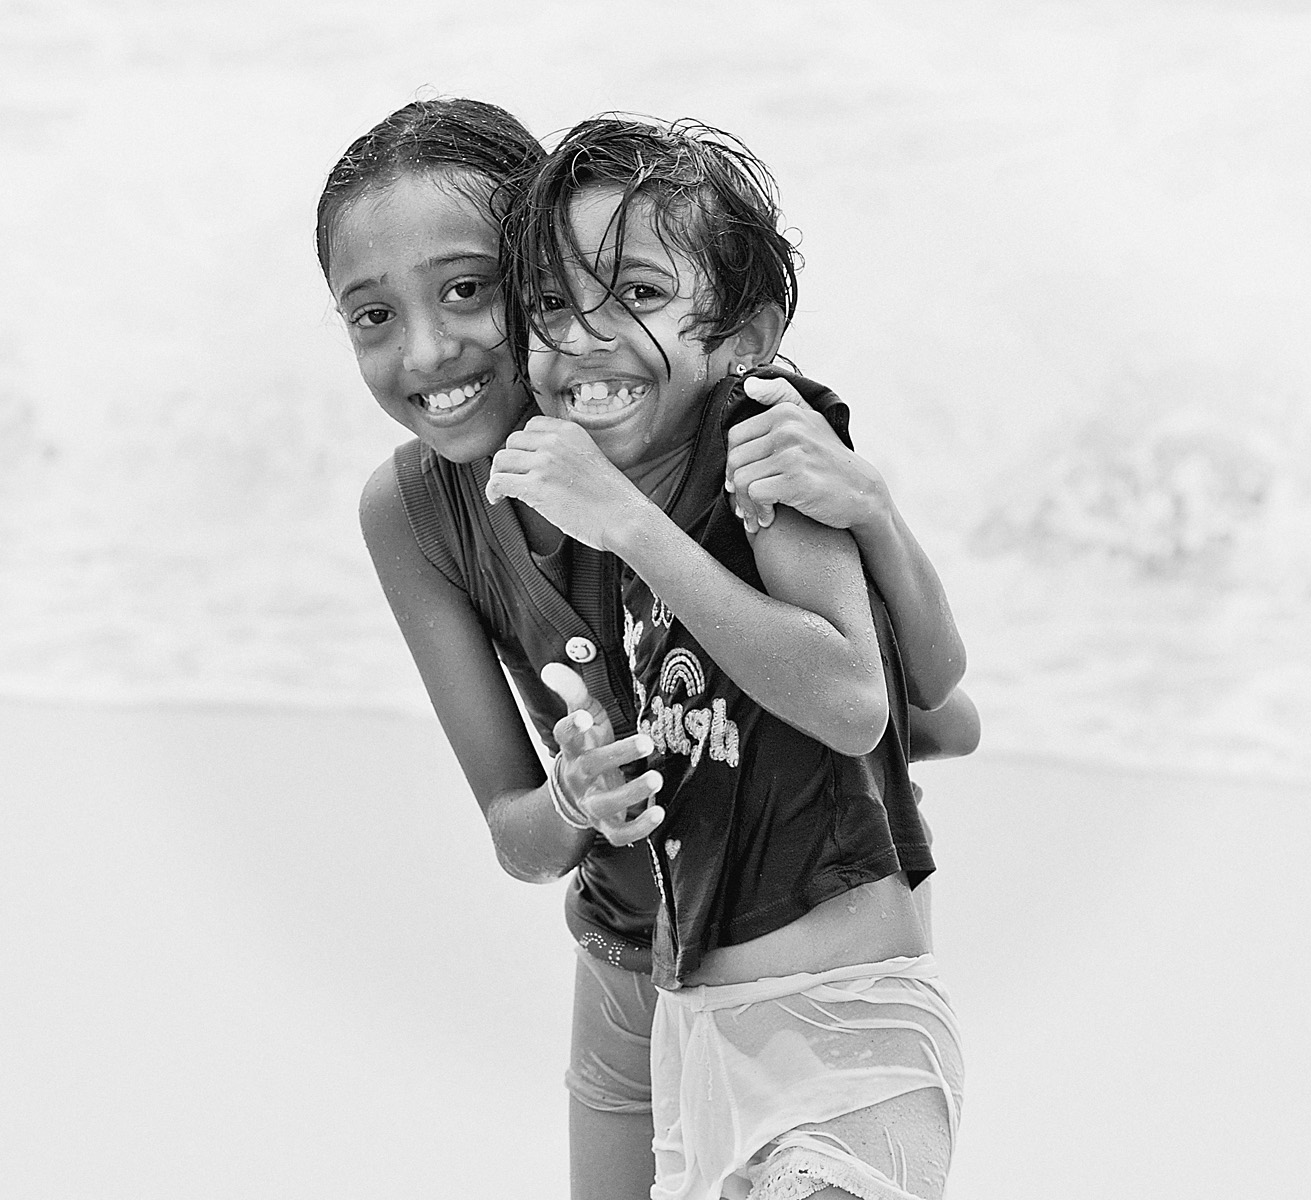 LOCAL GIRLS, Colombo Beach, Sri Lanka, Portraits, Locals, Street Photogarphy, Spur of the moment, capturing the moment